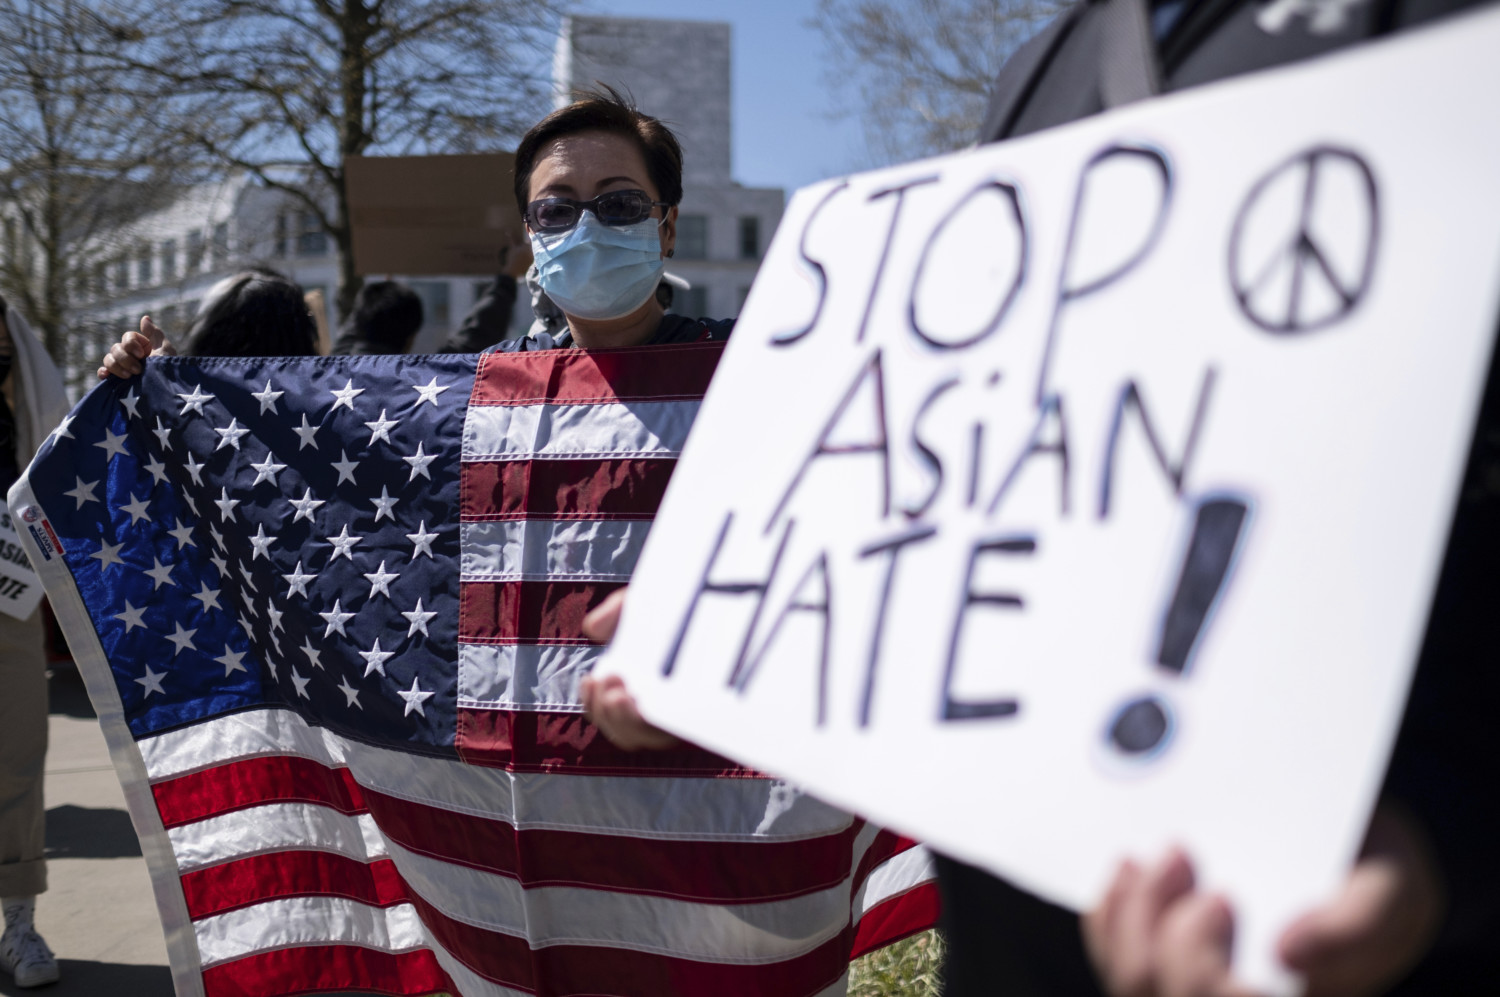 Protestor holds "stop Asian hate" sign